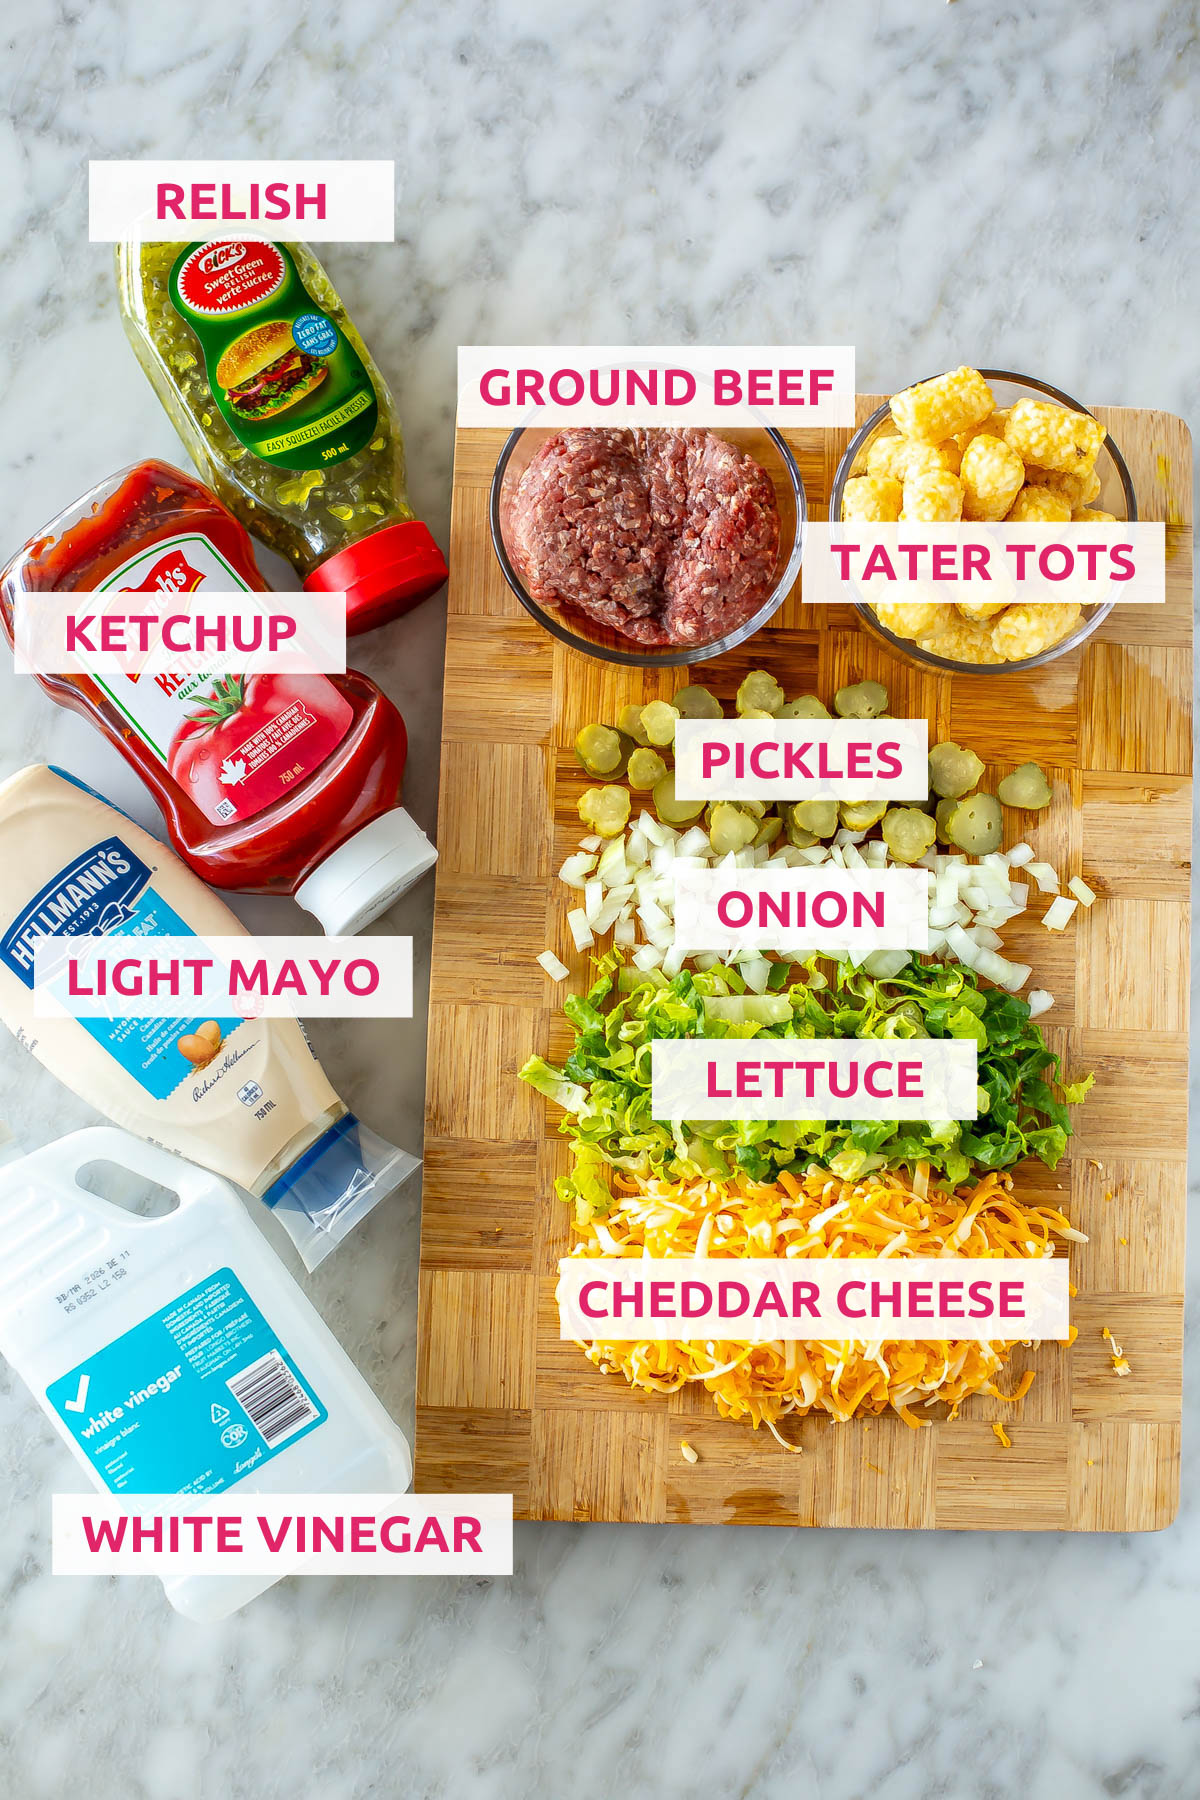 Ingredients for big mac tater tot nachos: ground beef, tater tots, pickles, onion, lettuce, cheddar cheese, white vinegar, light mayo, ketchup and relish.